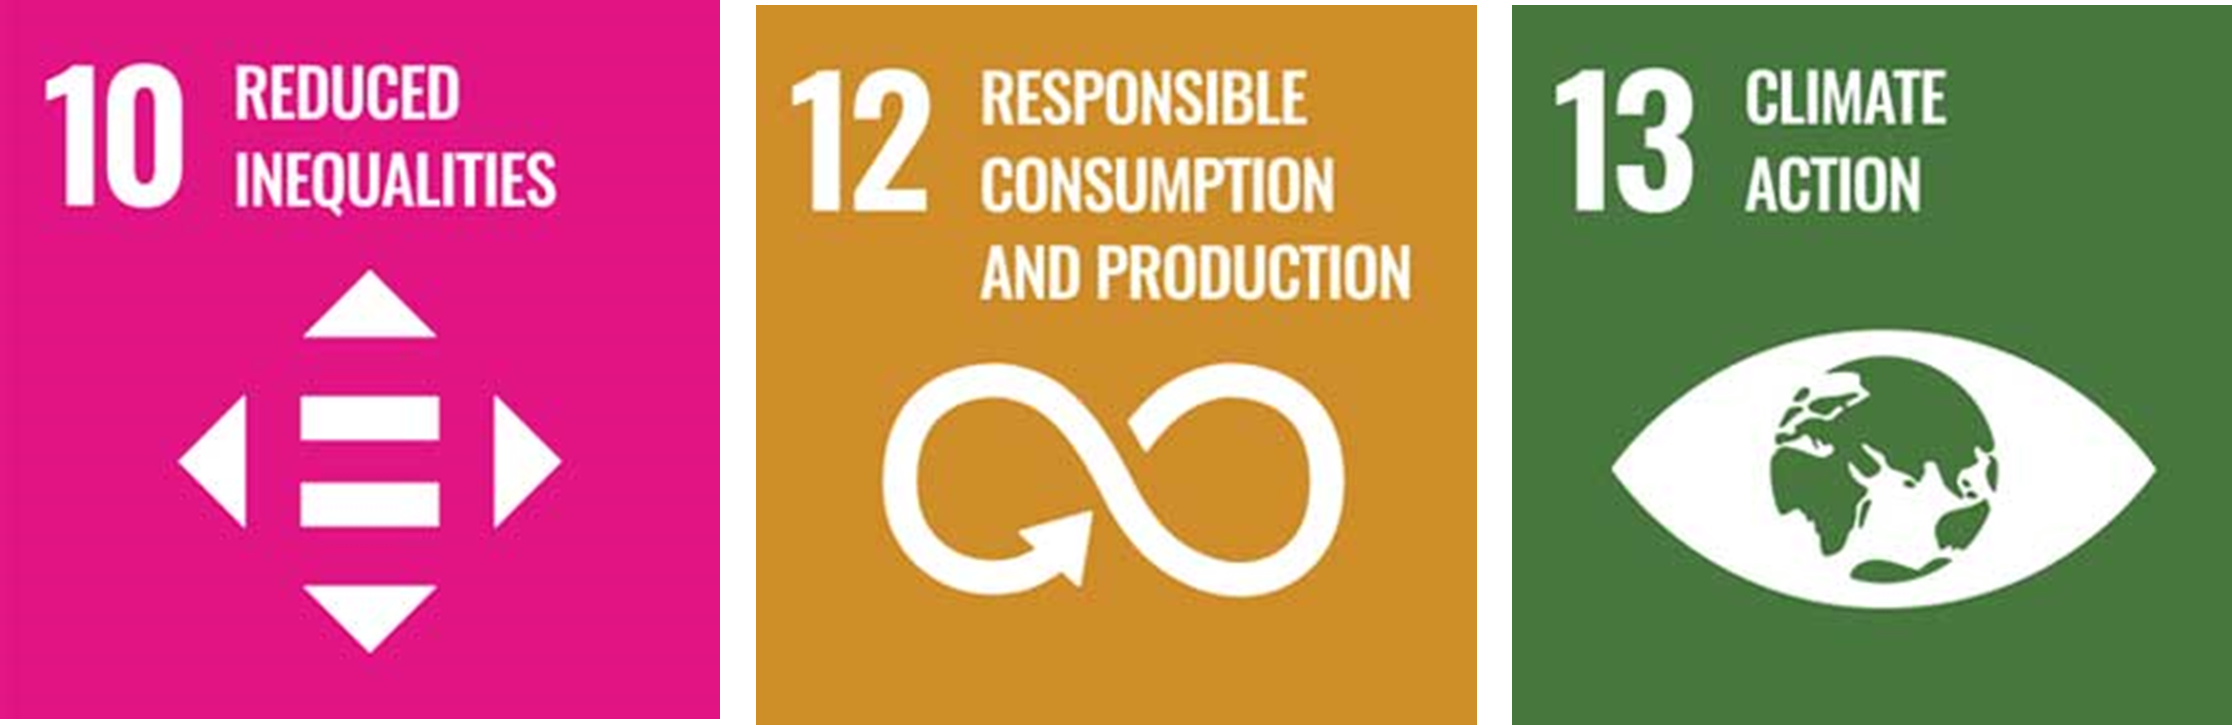 Description: 3 icons which represent the Sustainable Development Goals that the Accessibility Standards Canada is pledging to implement. Icon 1: Goal 10: Reduced Inequalities. Goal 12: Responsible Consumption and Production. Icon 3: Climate Action.